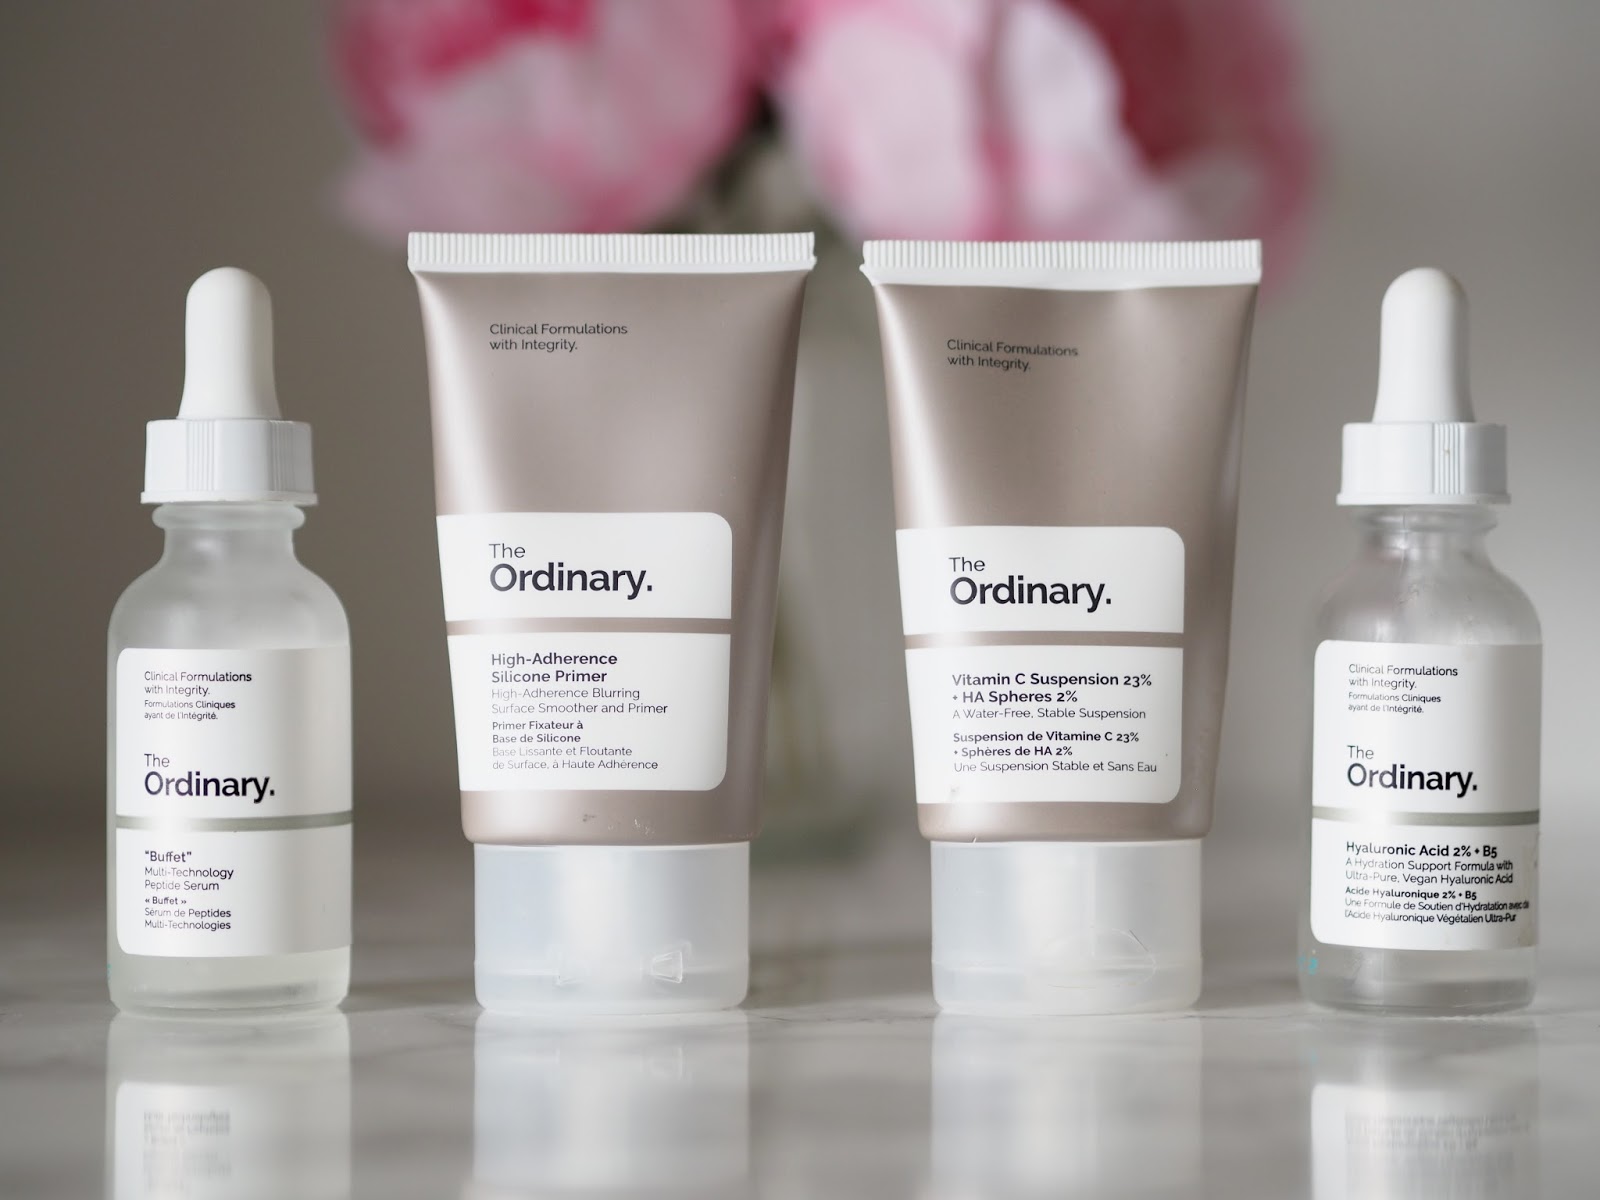 The Ordinary \ Skincare that everyone is still talking about \ Deciem \ The abnormal beauty company \ beauty \ skin \  cosmeceuticals \ Priceless Life of Mine \ Over 40 lifestyle blog \ Leicester